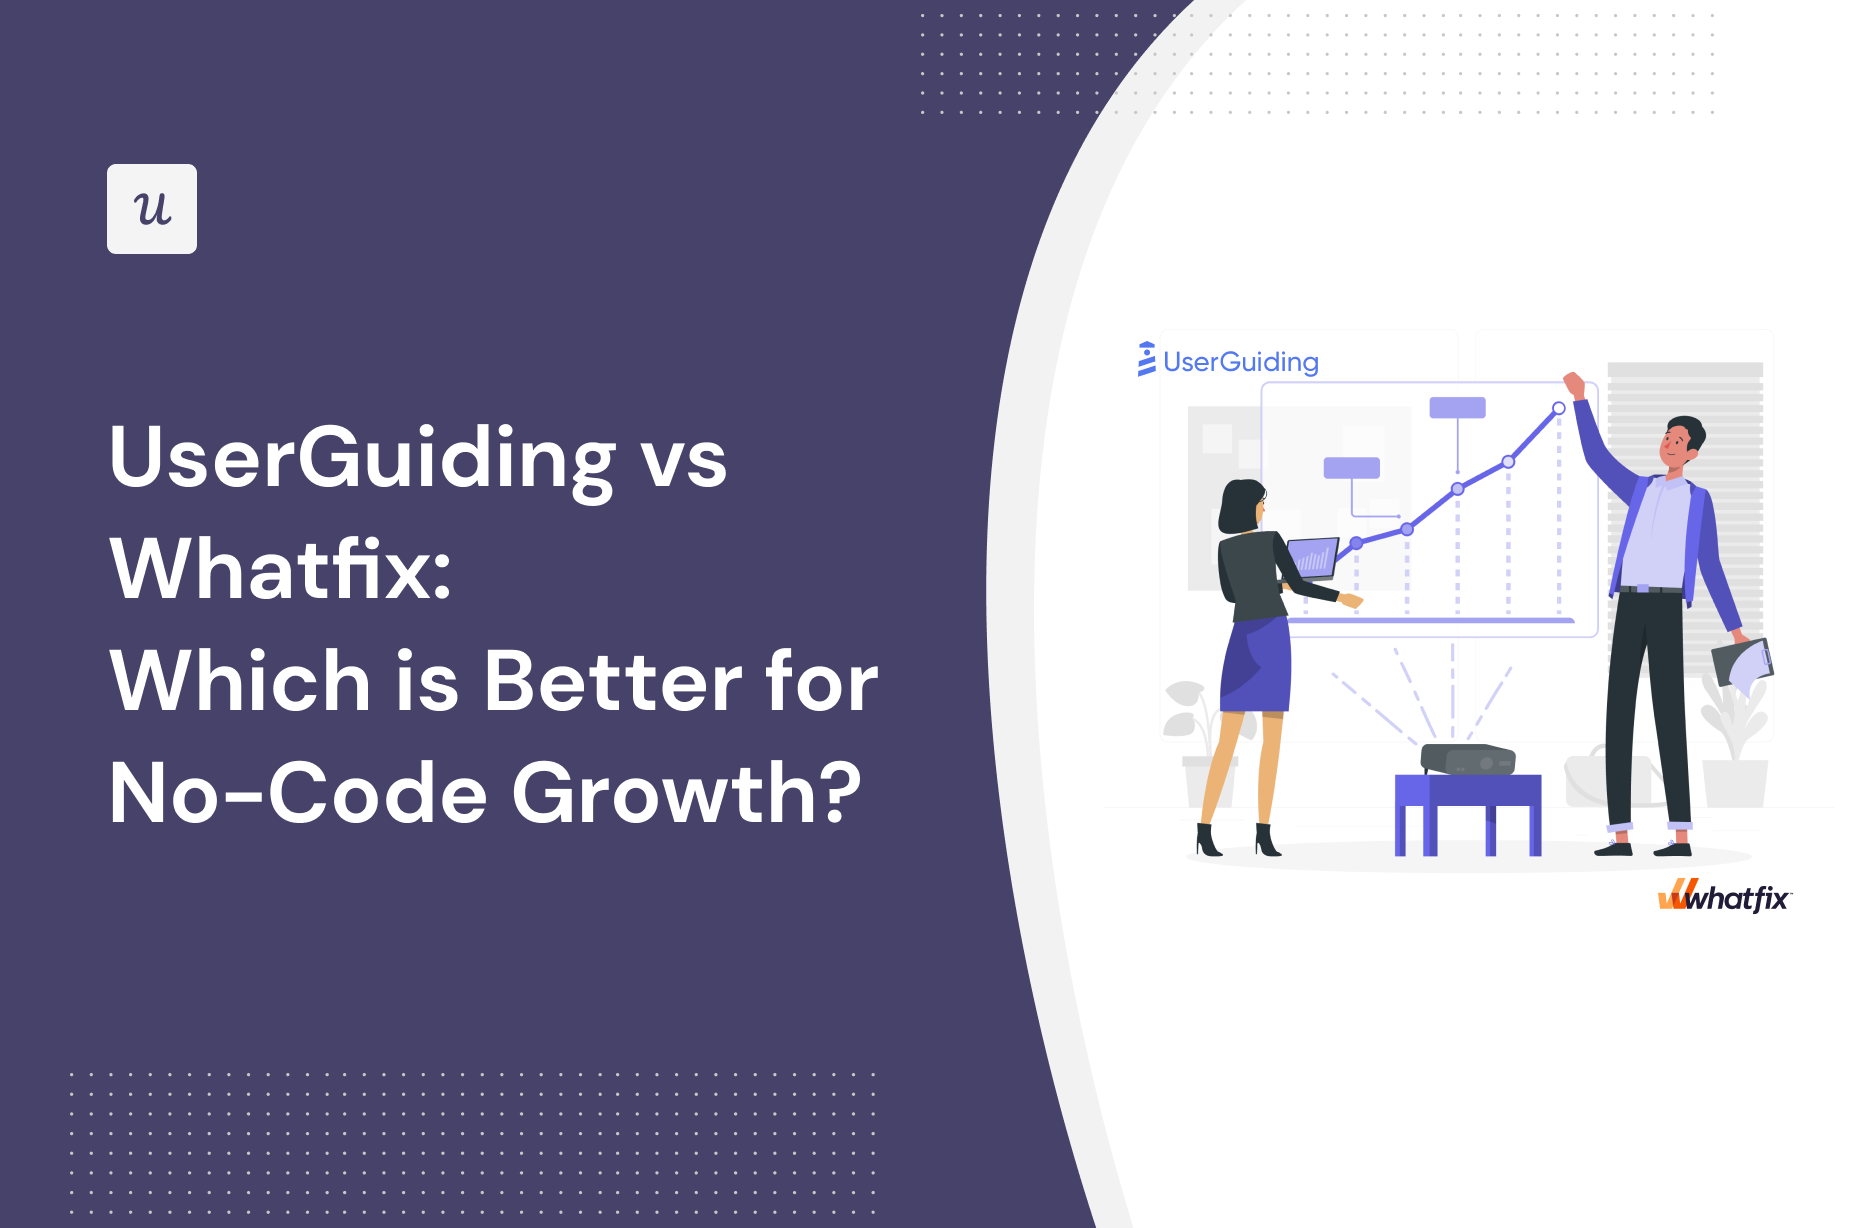 UserGuiding vs Whatfix: Which is Better for No-Code Growth?